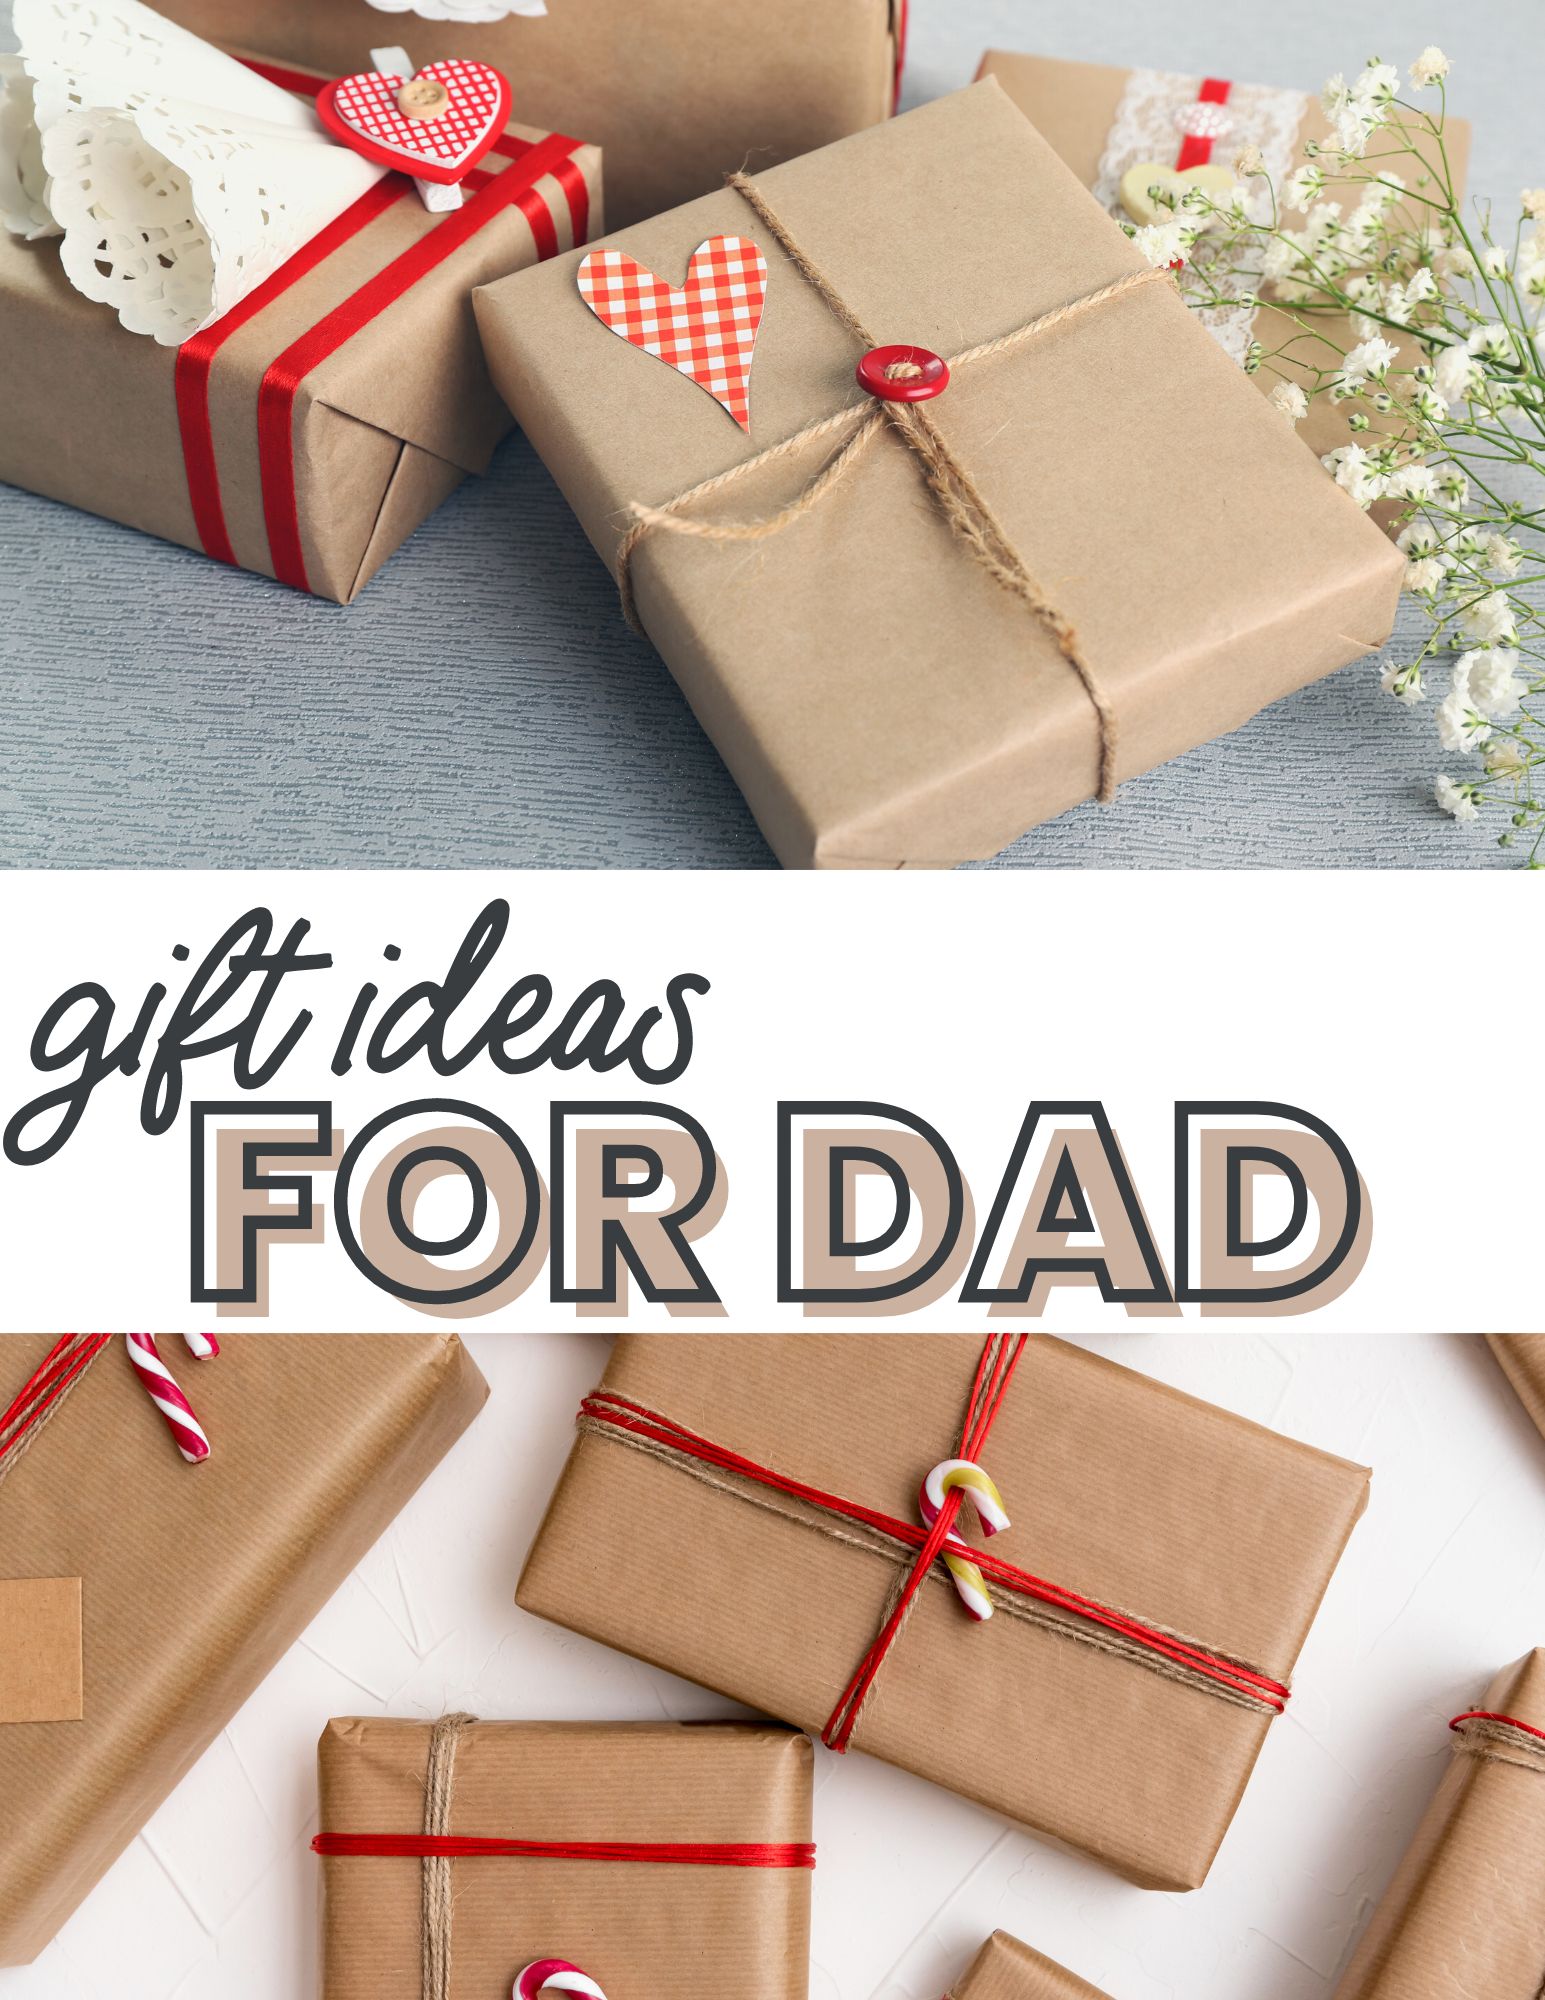 Gifts for Father: Unique Gift Idea for Dad – Giftcarnation